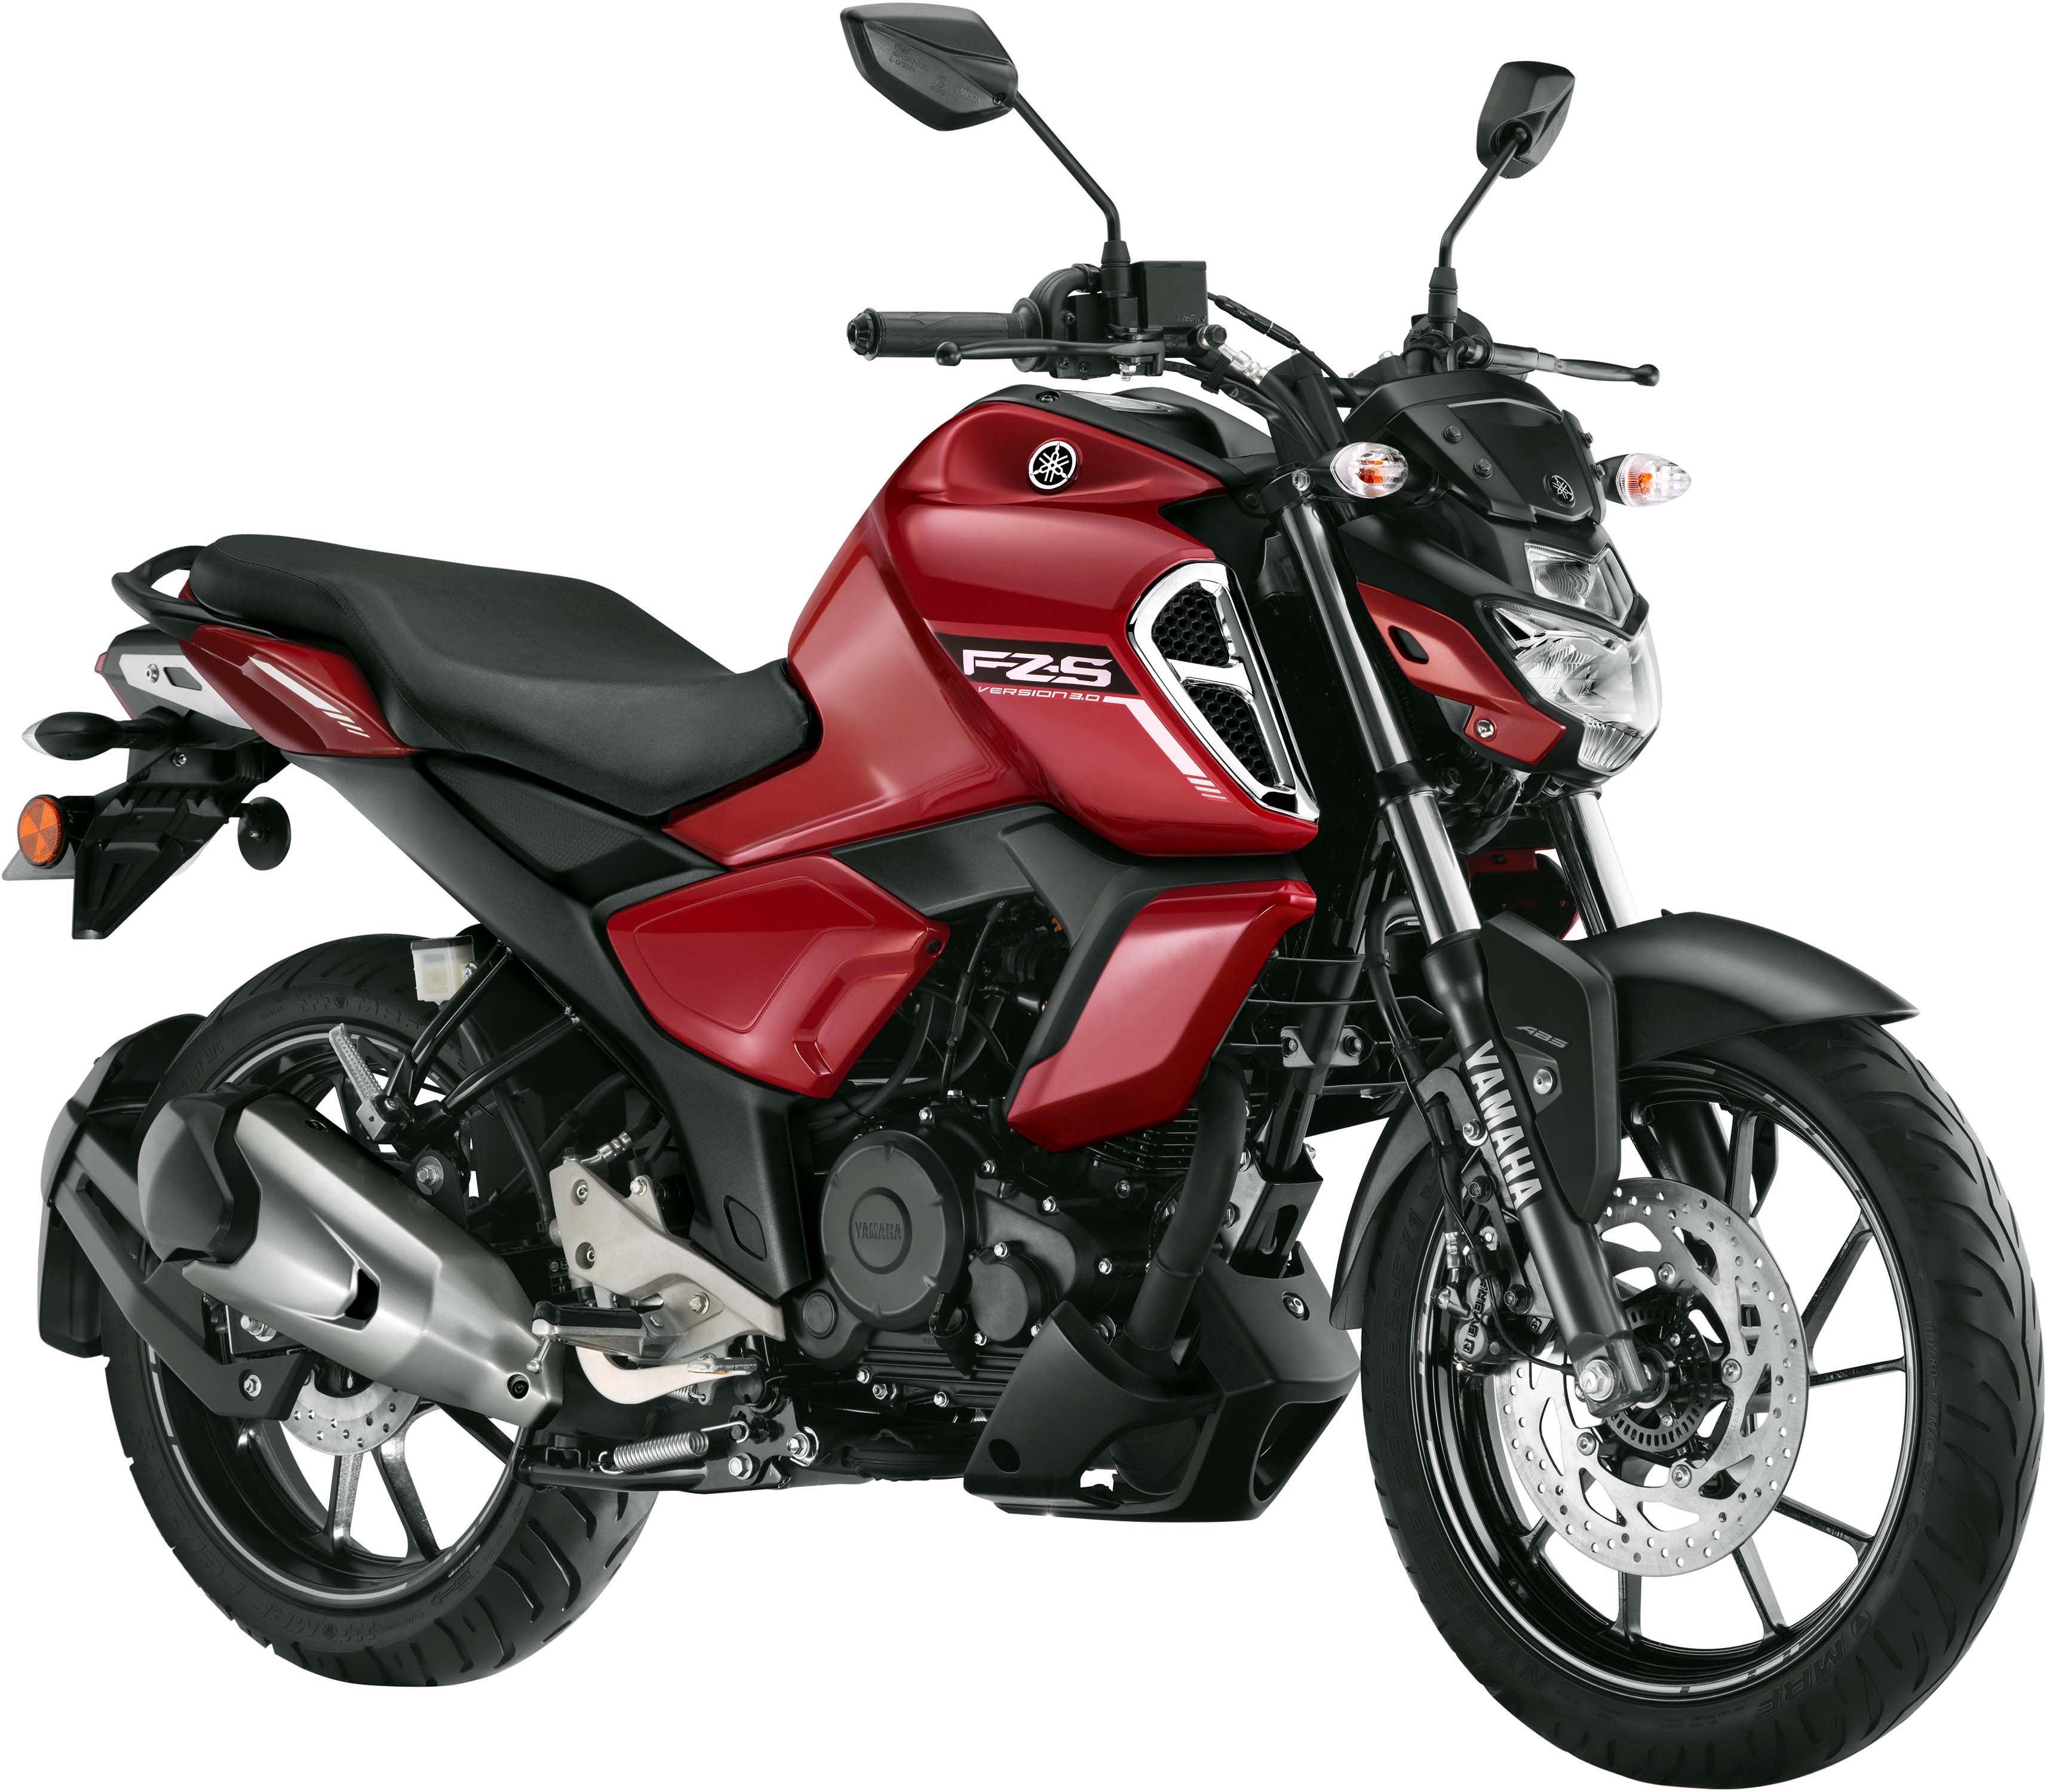 Yamaha FZ-FI and FZS-FI BS VI variants launched in India - Chandigarh ...